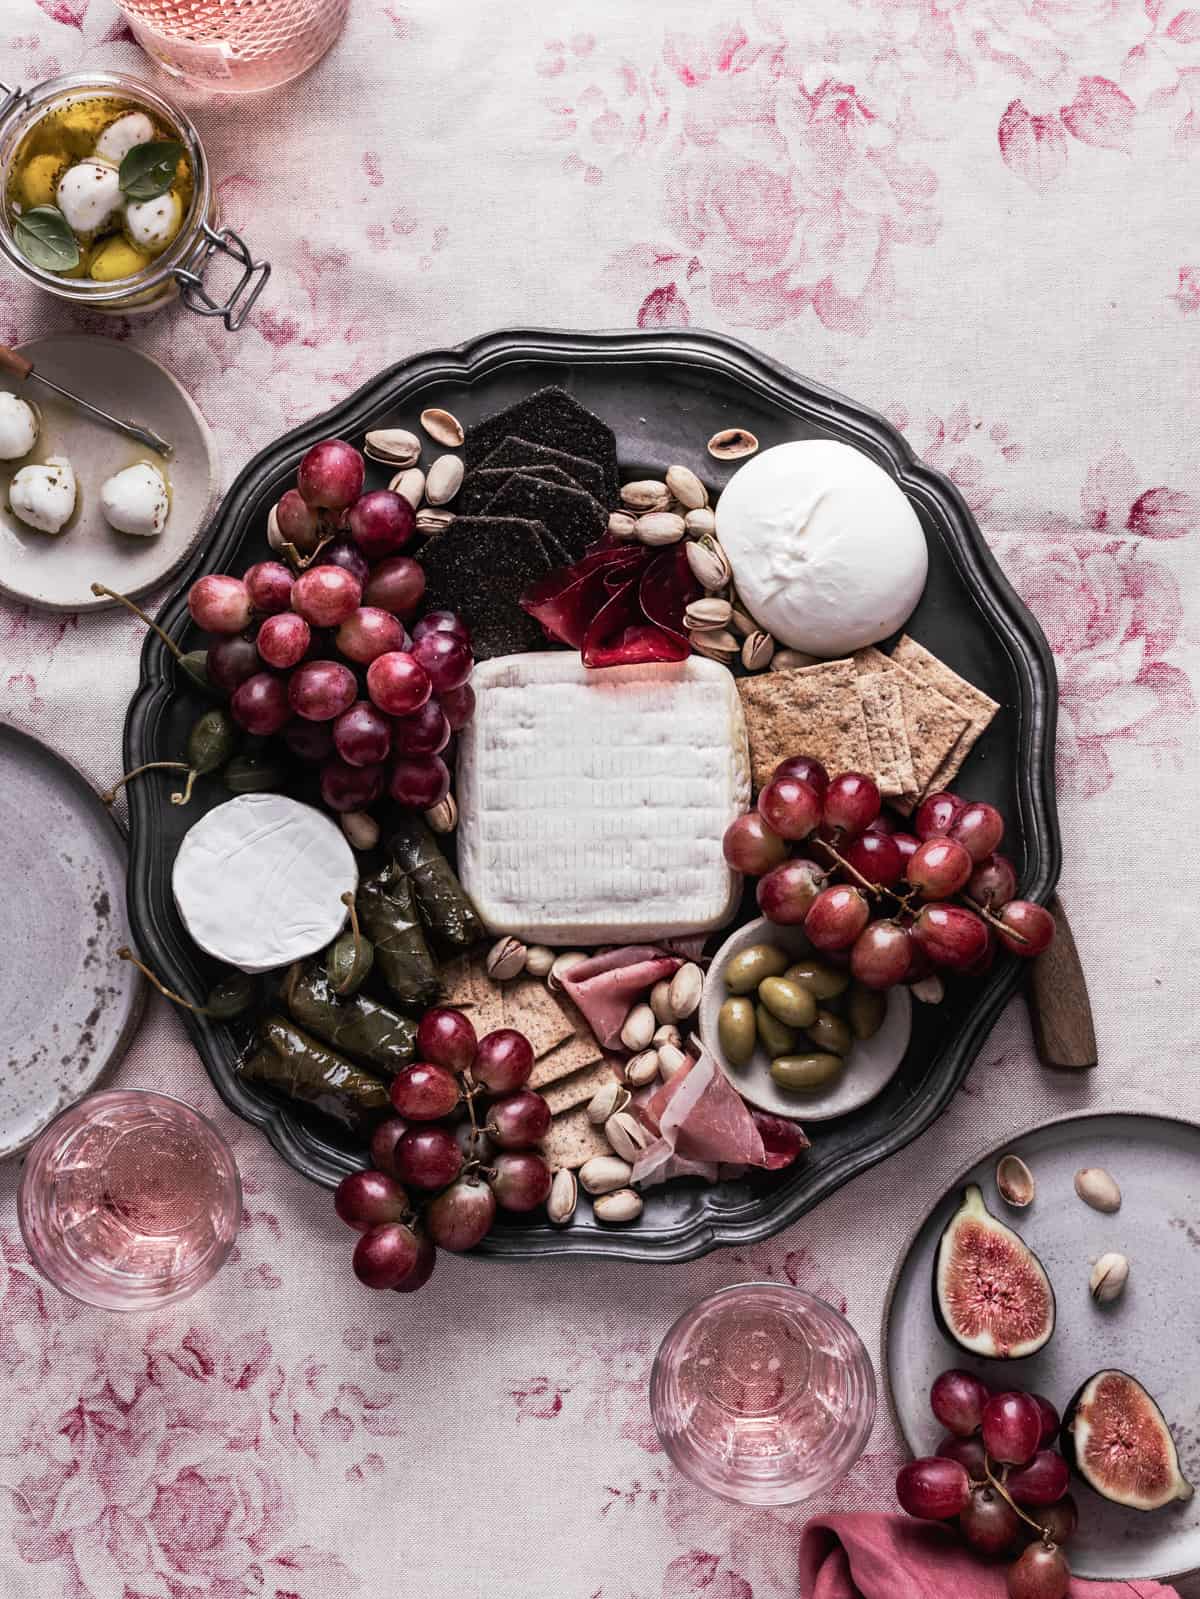 Mediterranean charcuterie board to it and on a tablecloth with a jar full of marinated mini mozzarella balls and few plates on the side with grapes and figs.